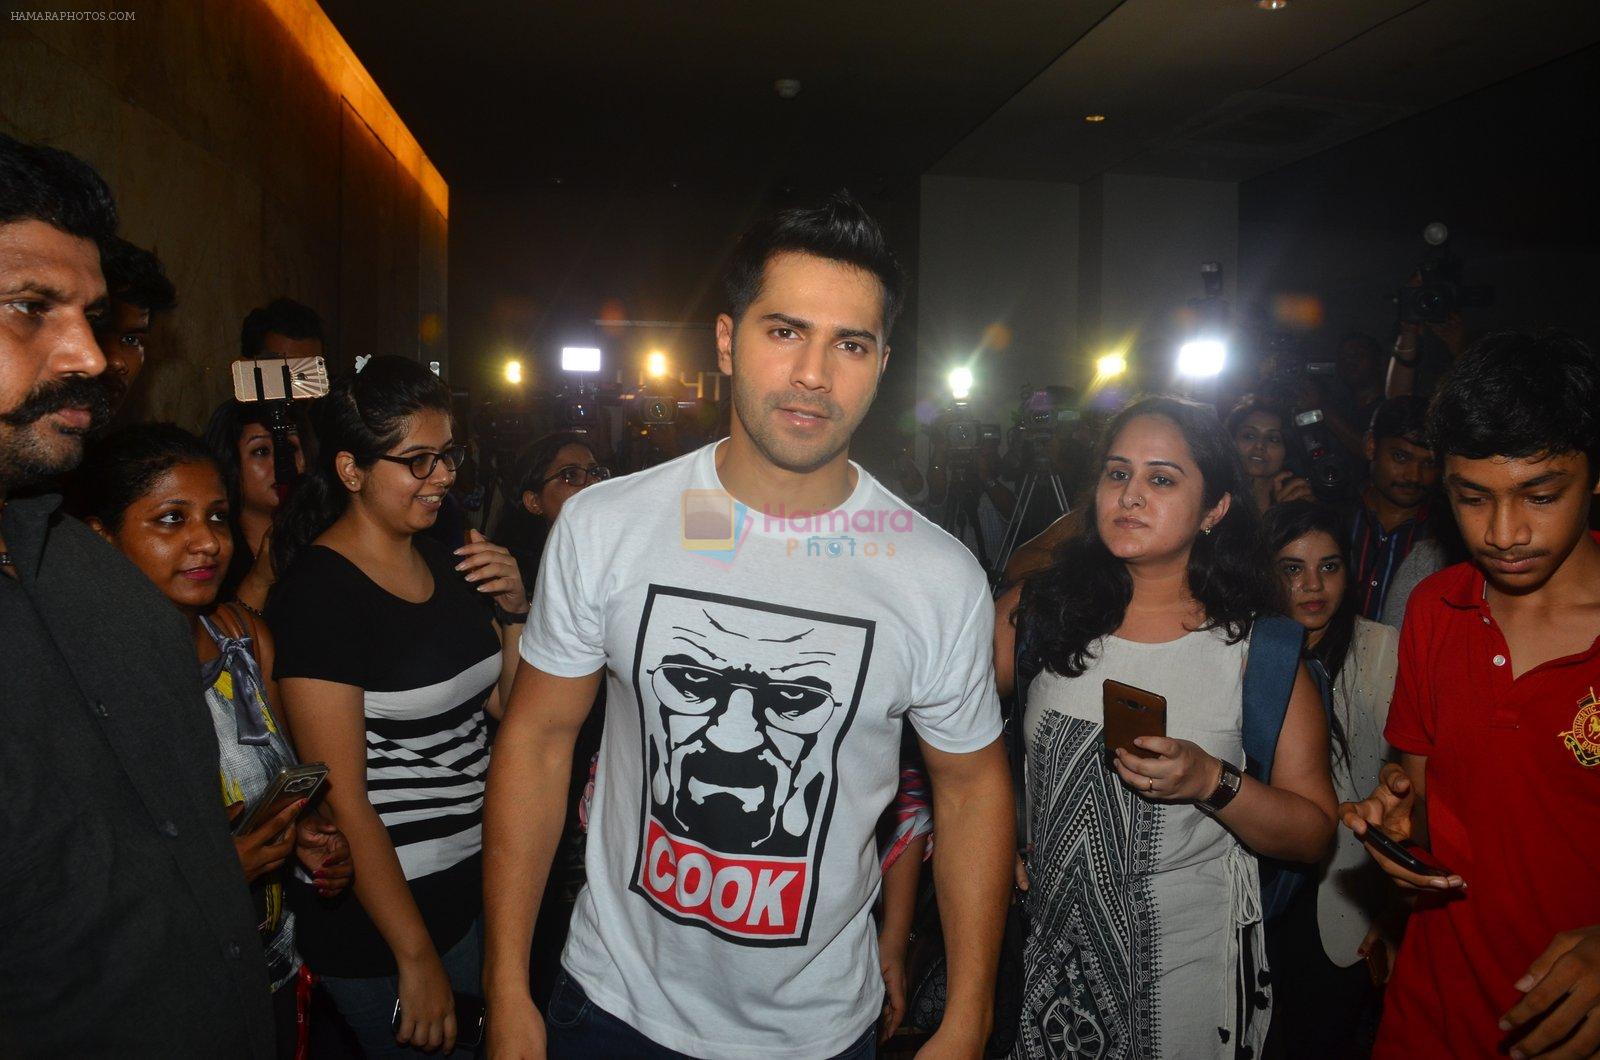 Varun Dhawan at song launch from movie Dishoom in Mumbai on 16th June 2016